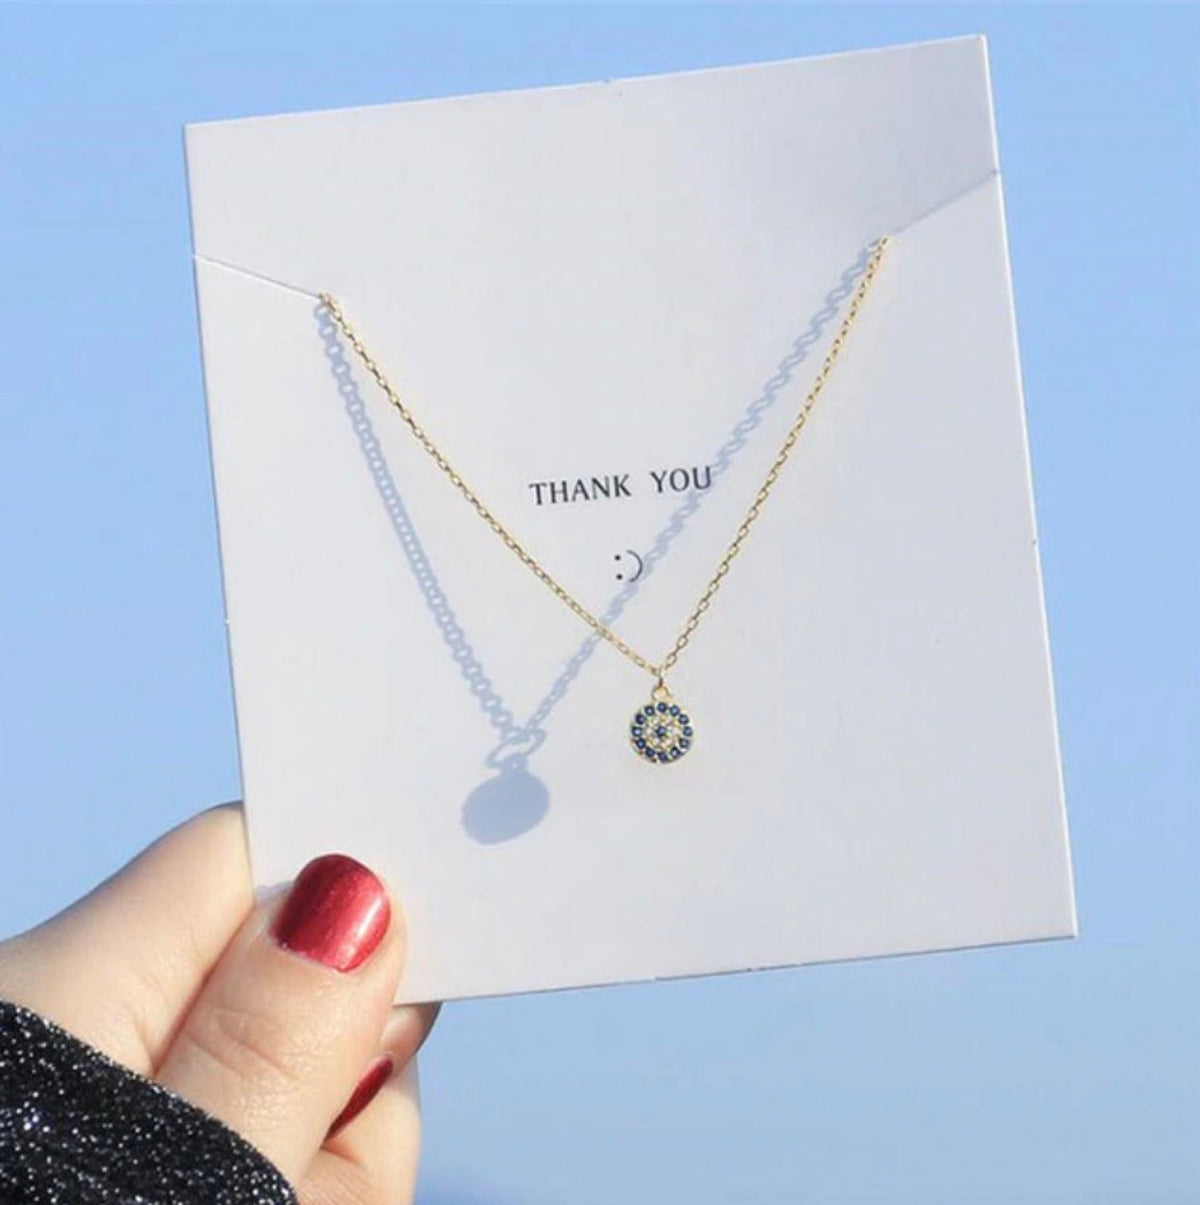 Luxe Time USA .925 Gold Tone Sterling Silver Evil Eye Necklace 16 inch w/ Adjustable Chain